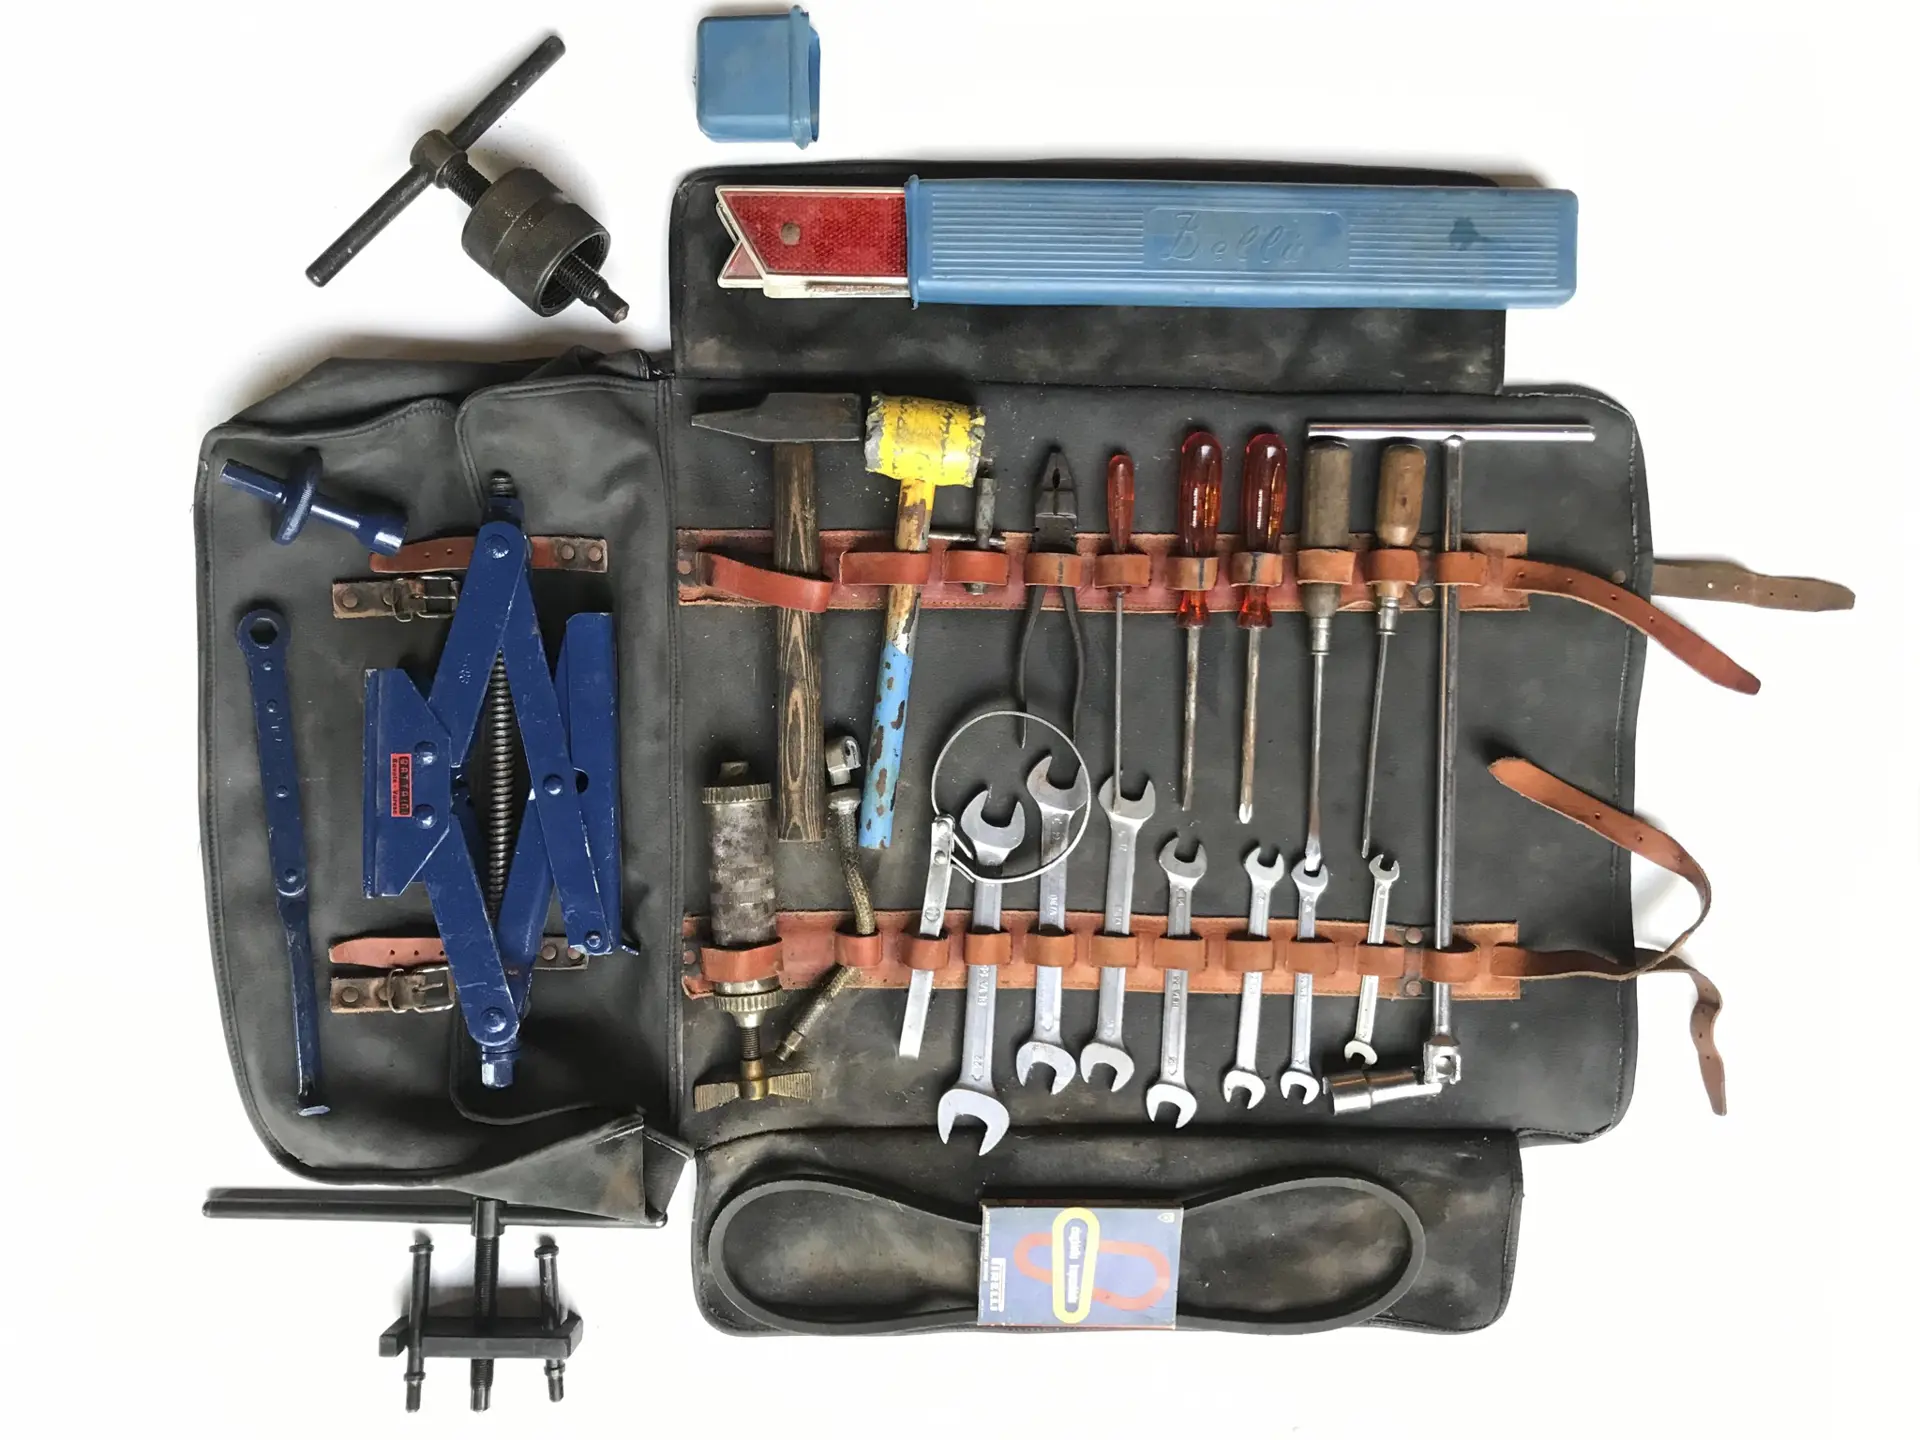 Ferrari 275 Tool Kit with Jack | The European Sale featuring the ...